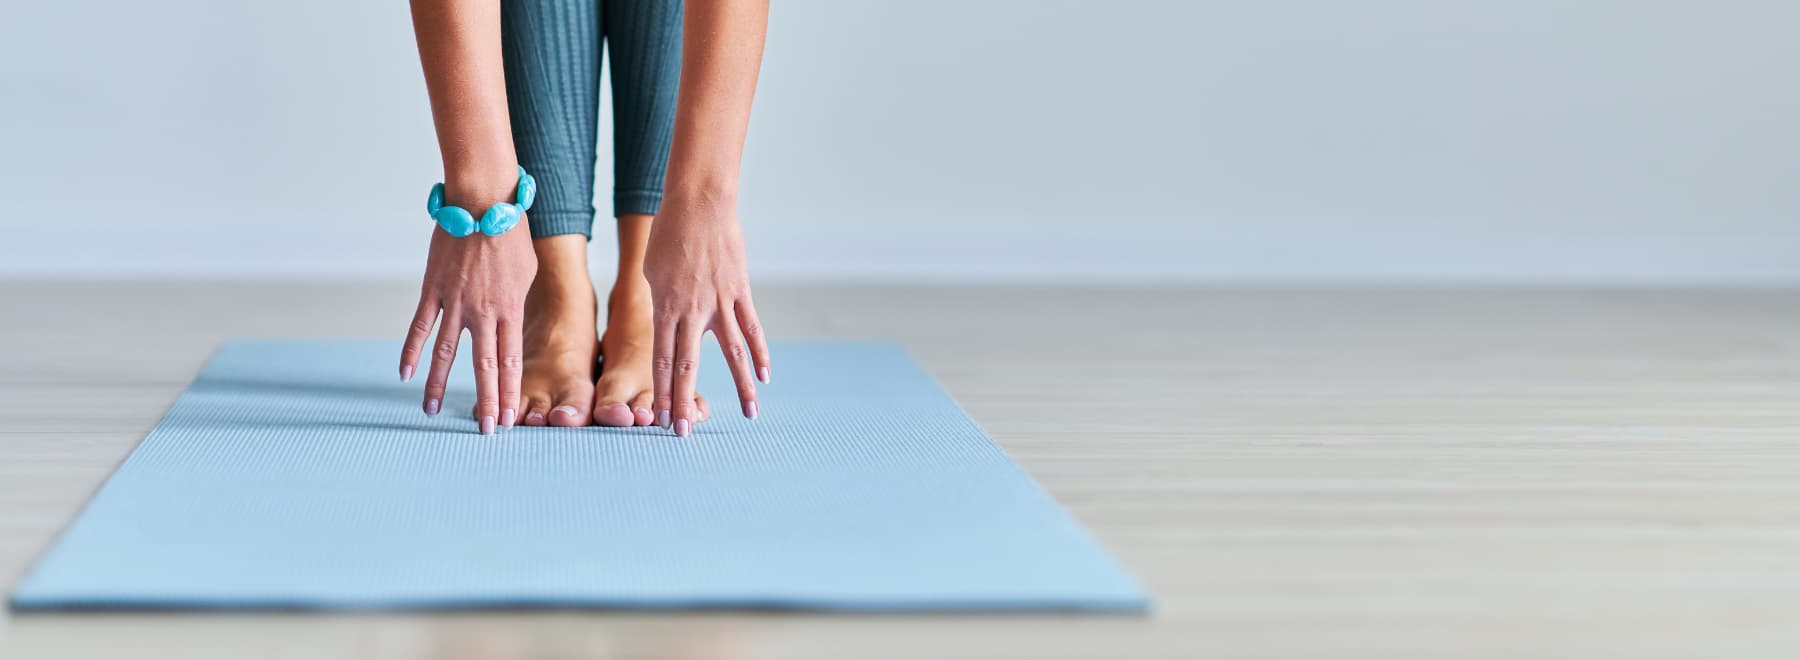 closeup of hands and feet of woman performing yoga pose while standing on a mat